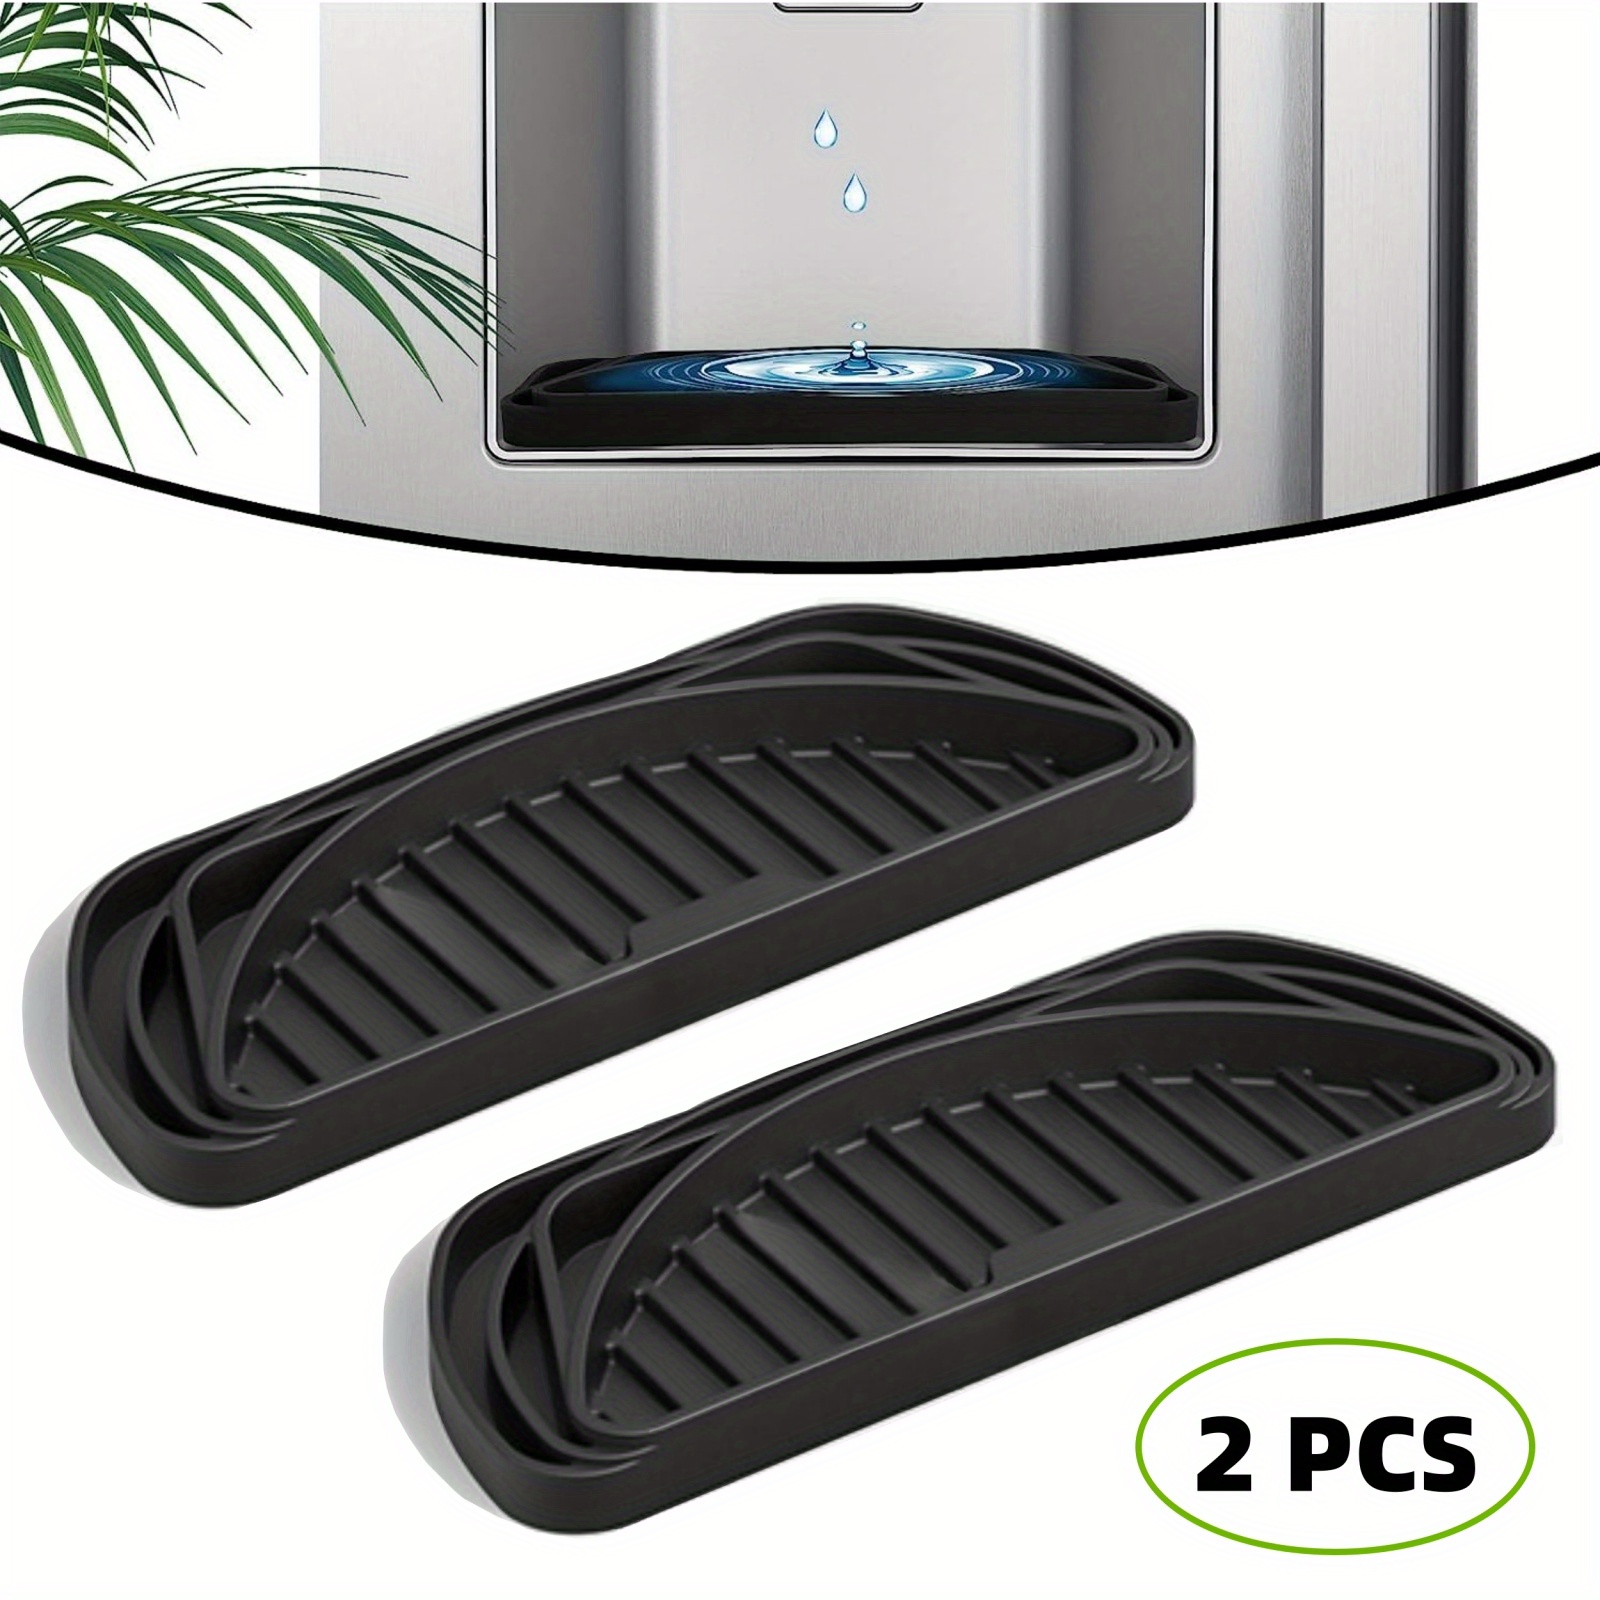 2PCS Water Tray Water Drip Drip Refrigerator Drip Tray for Kitchen